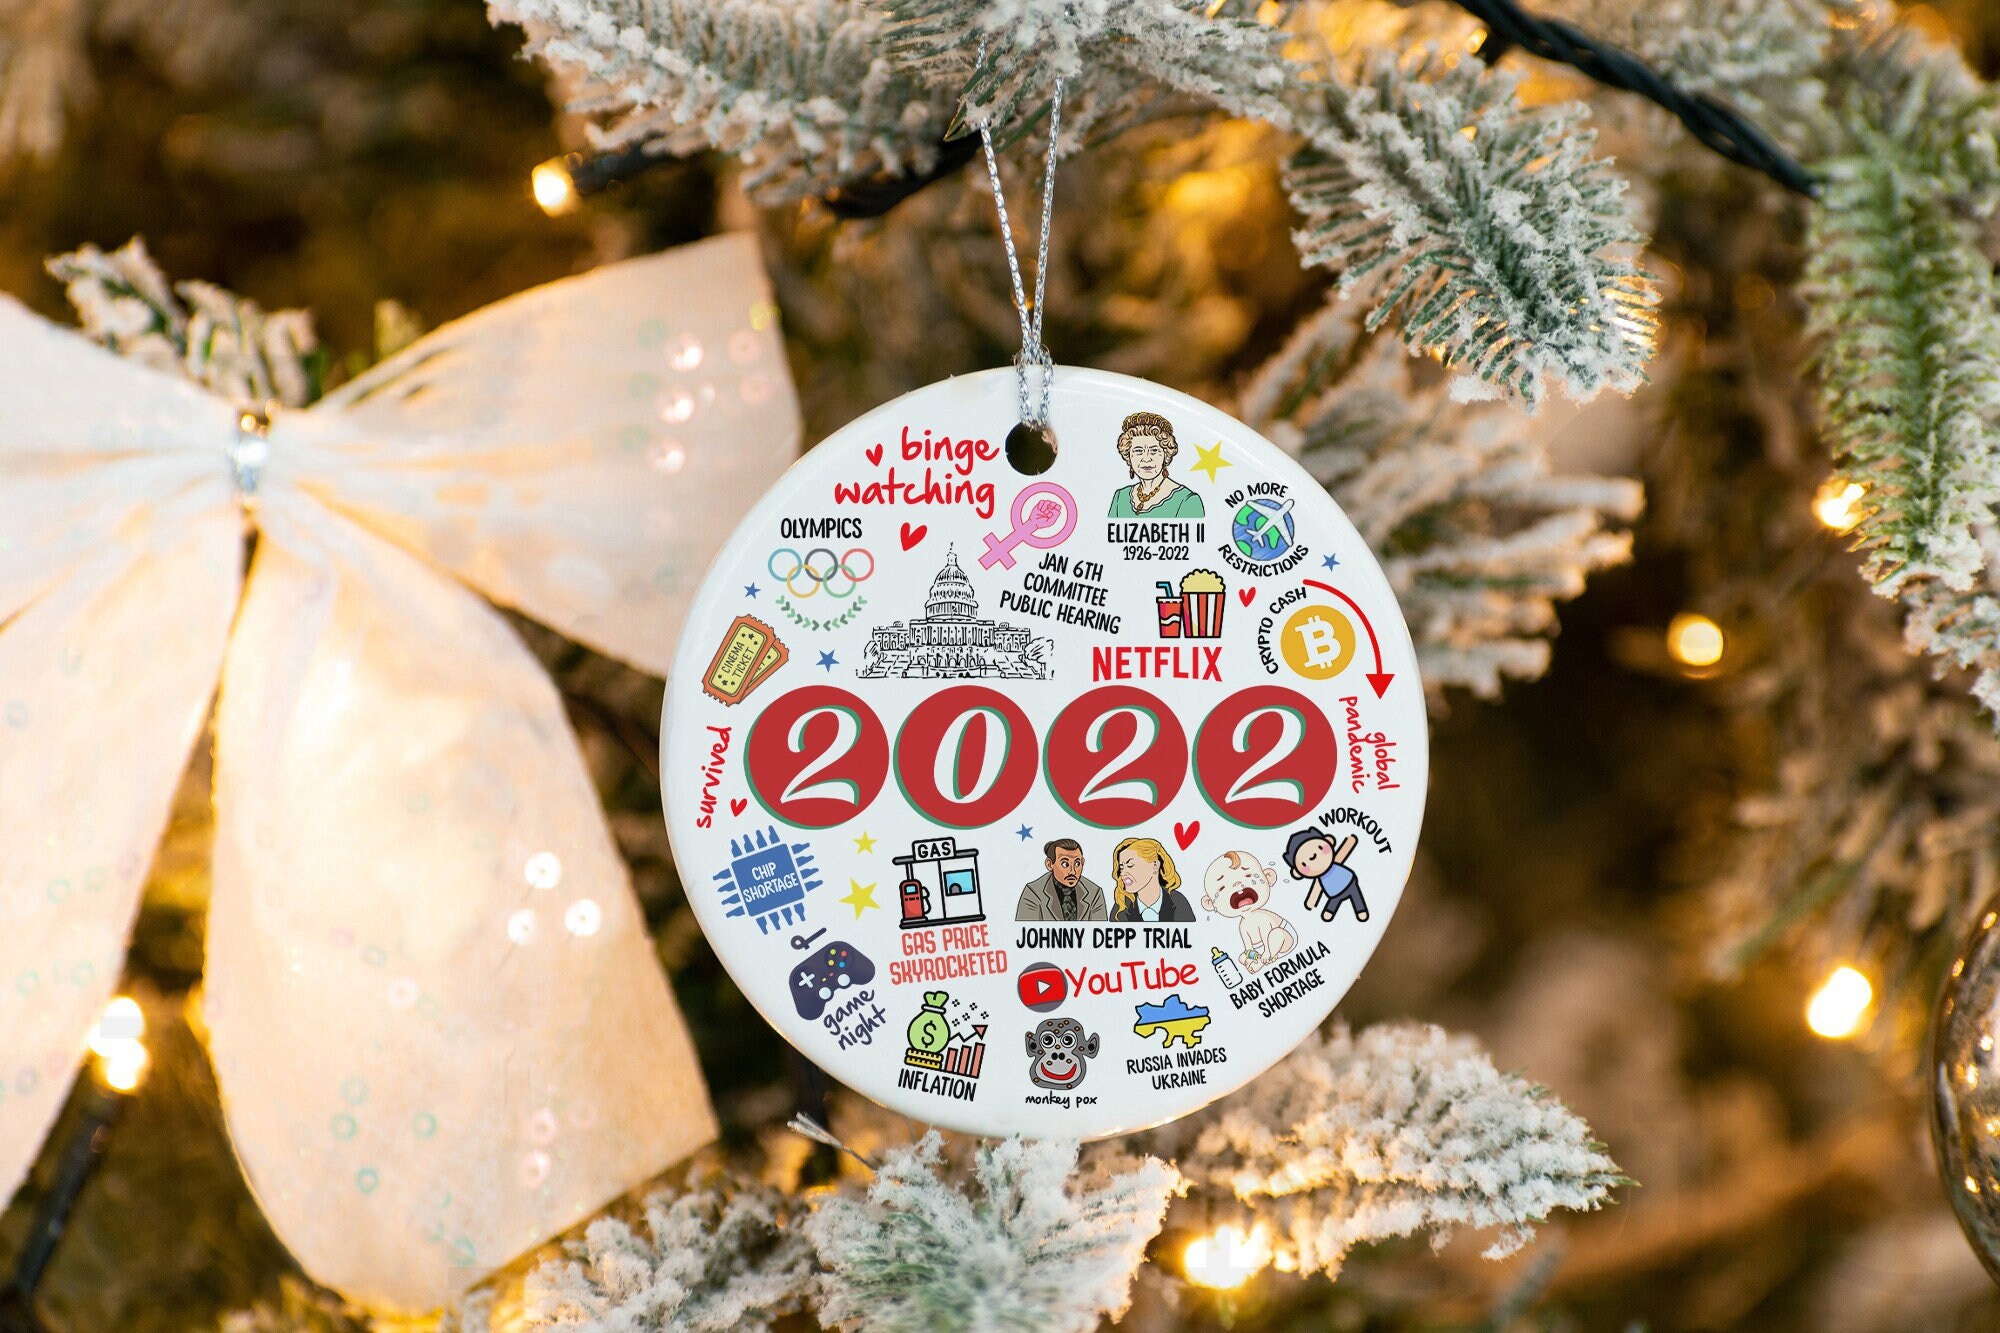 Discover 2022 A Stranger Year Ornament, Year in Review Christmas Ornament, 2022 Gas Ornament